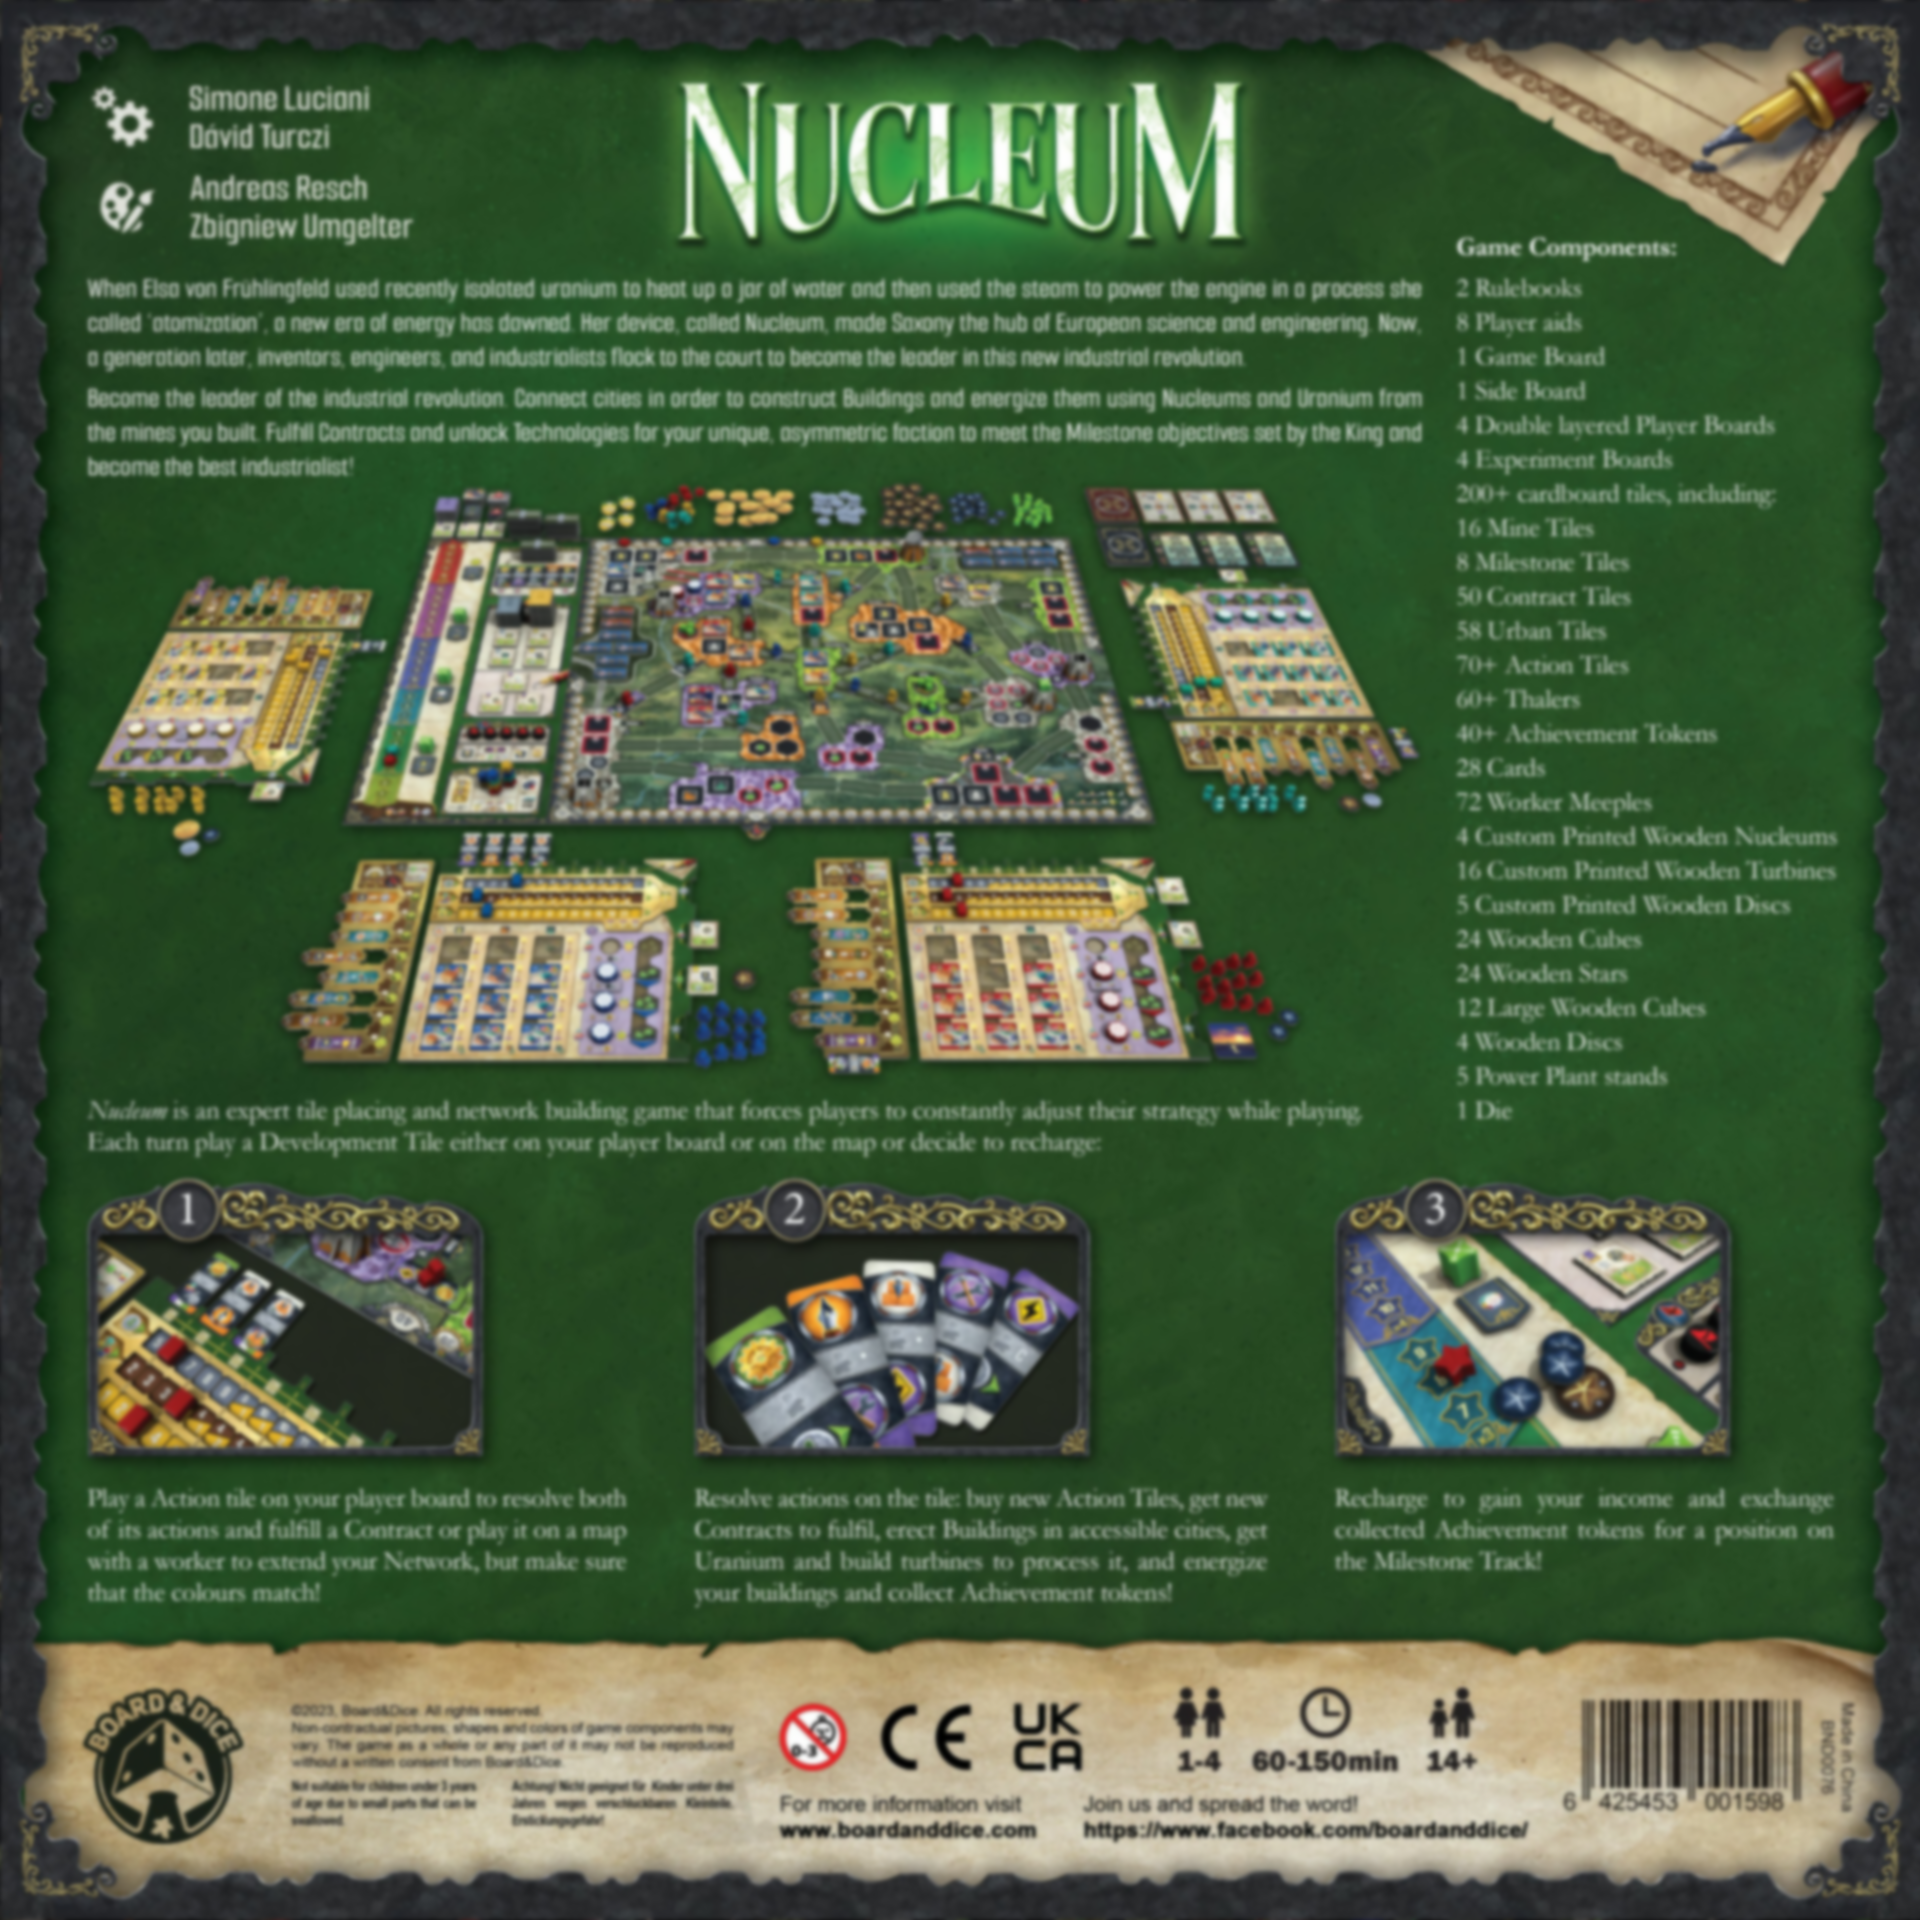 Nucleum back of the box